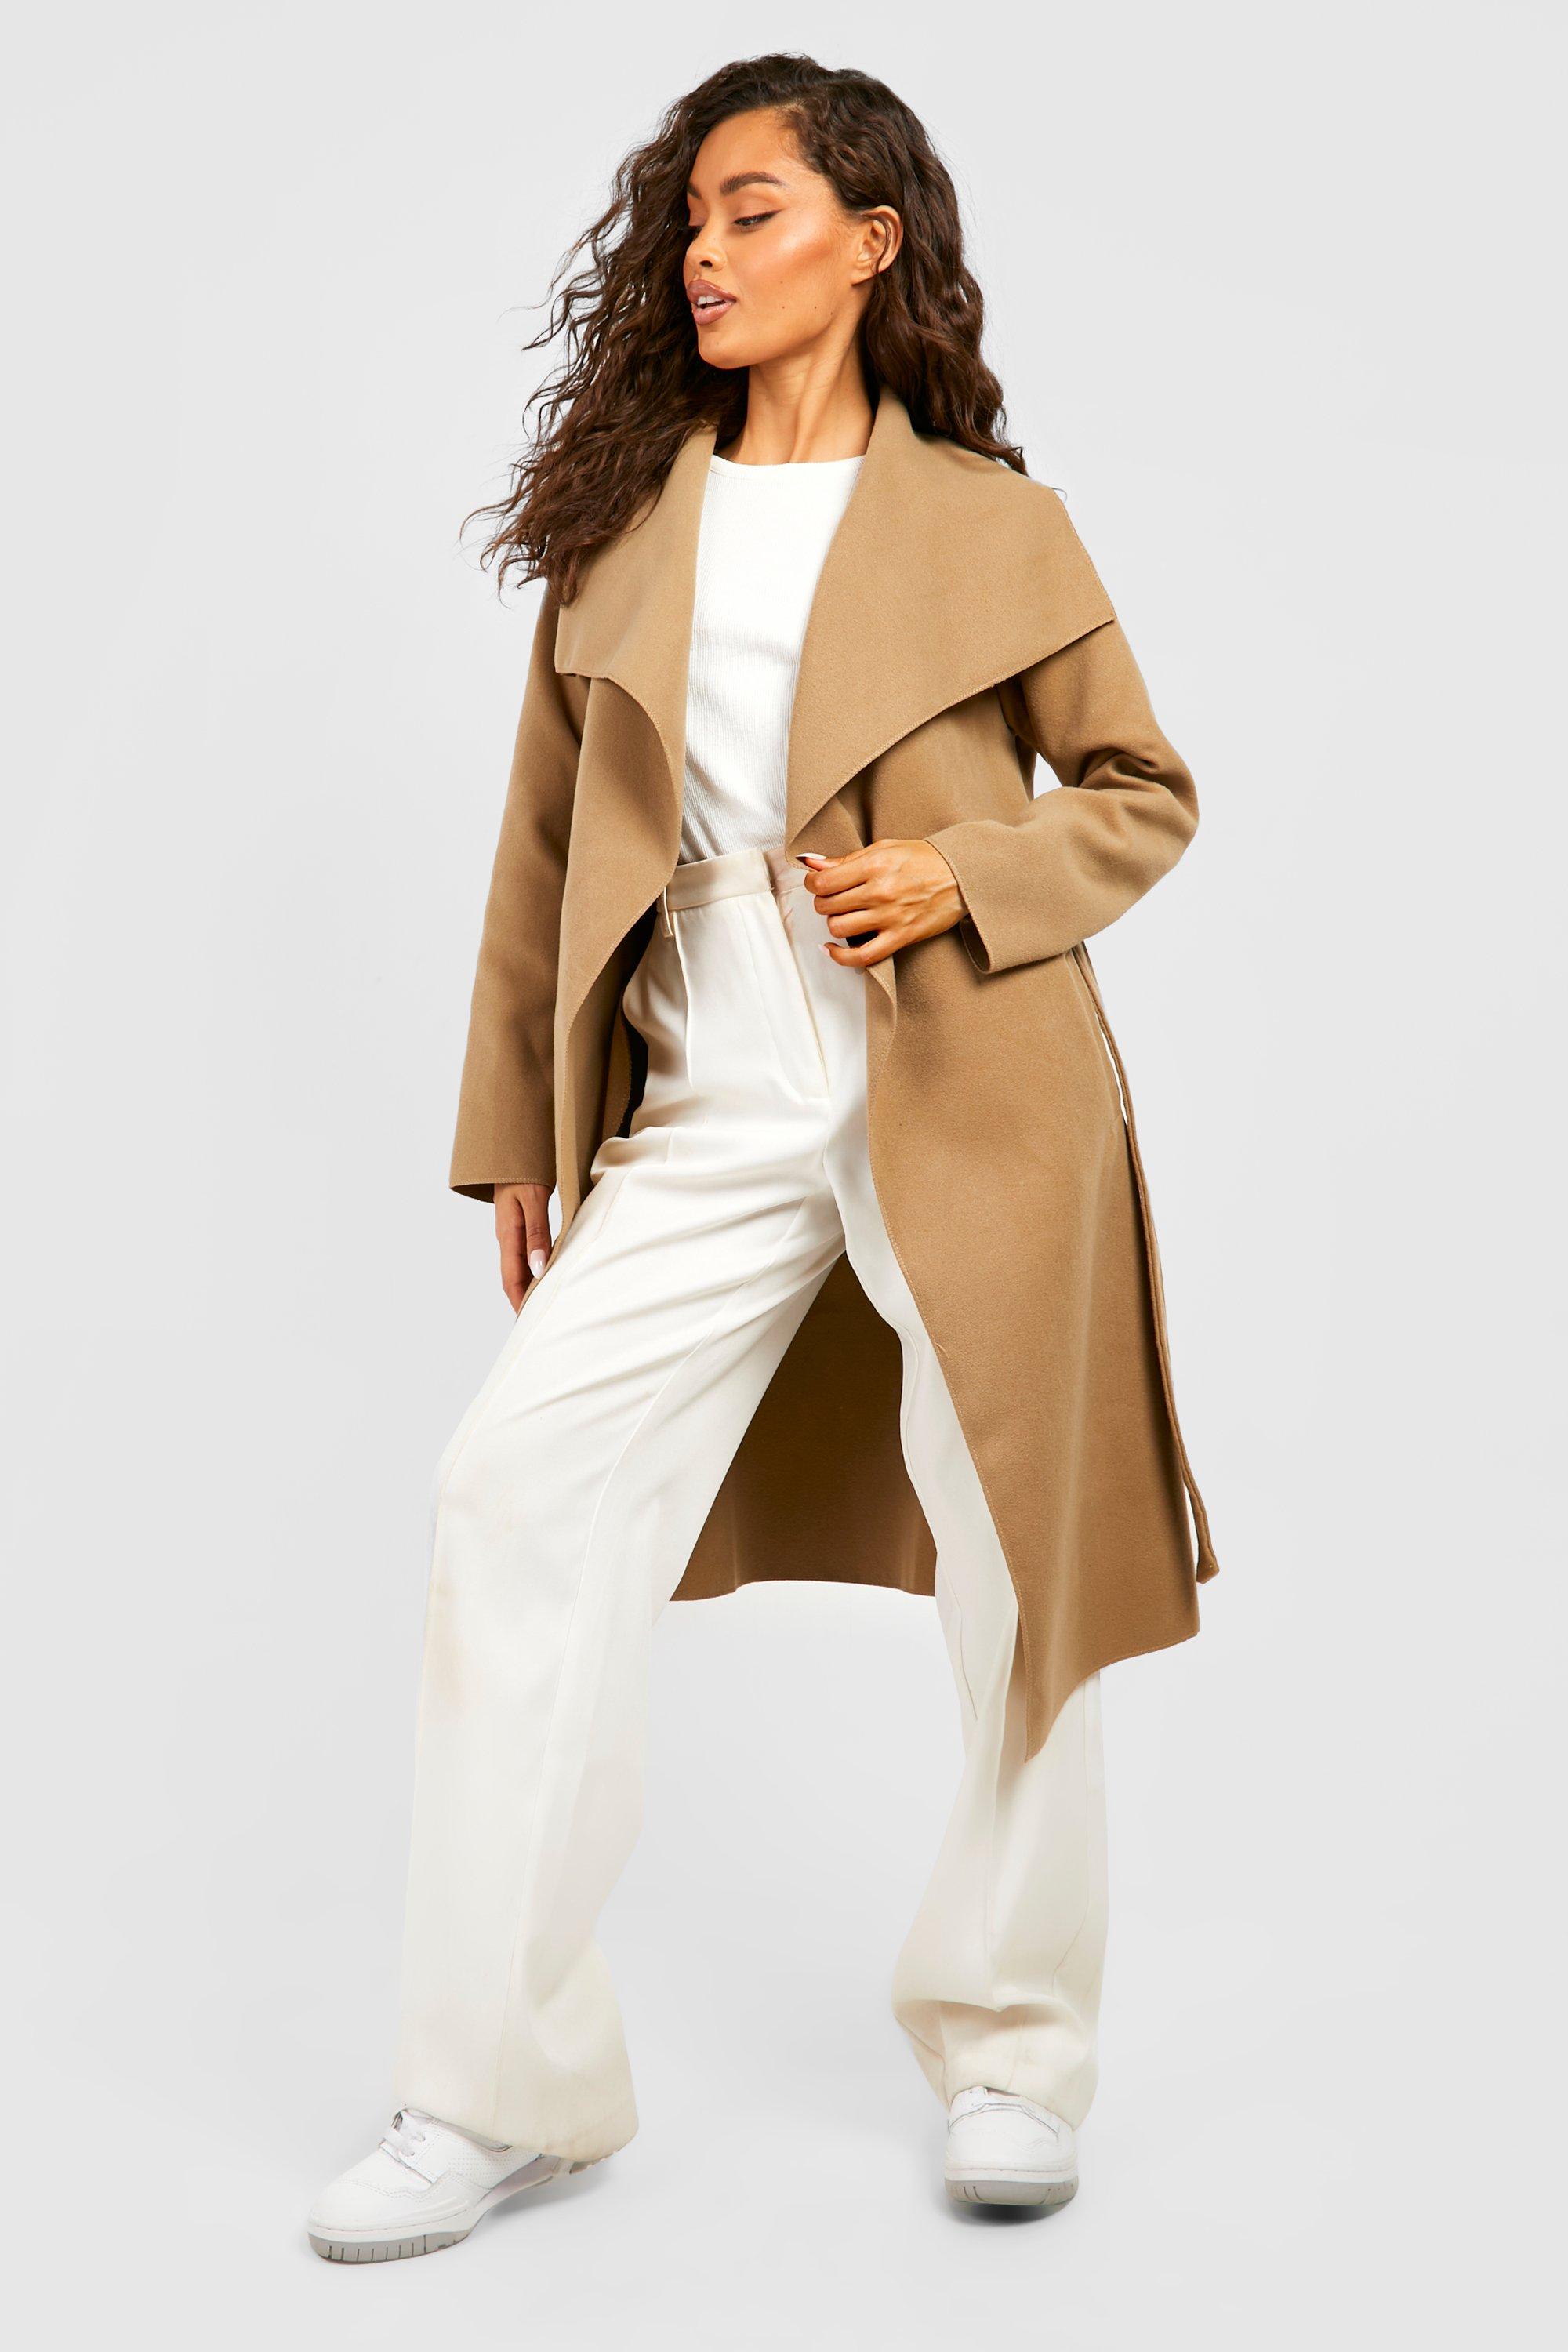 Boohoo Womens Belted Shawl Collar Coat - Beige - One Size